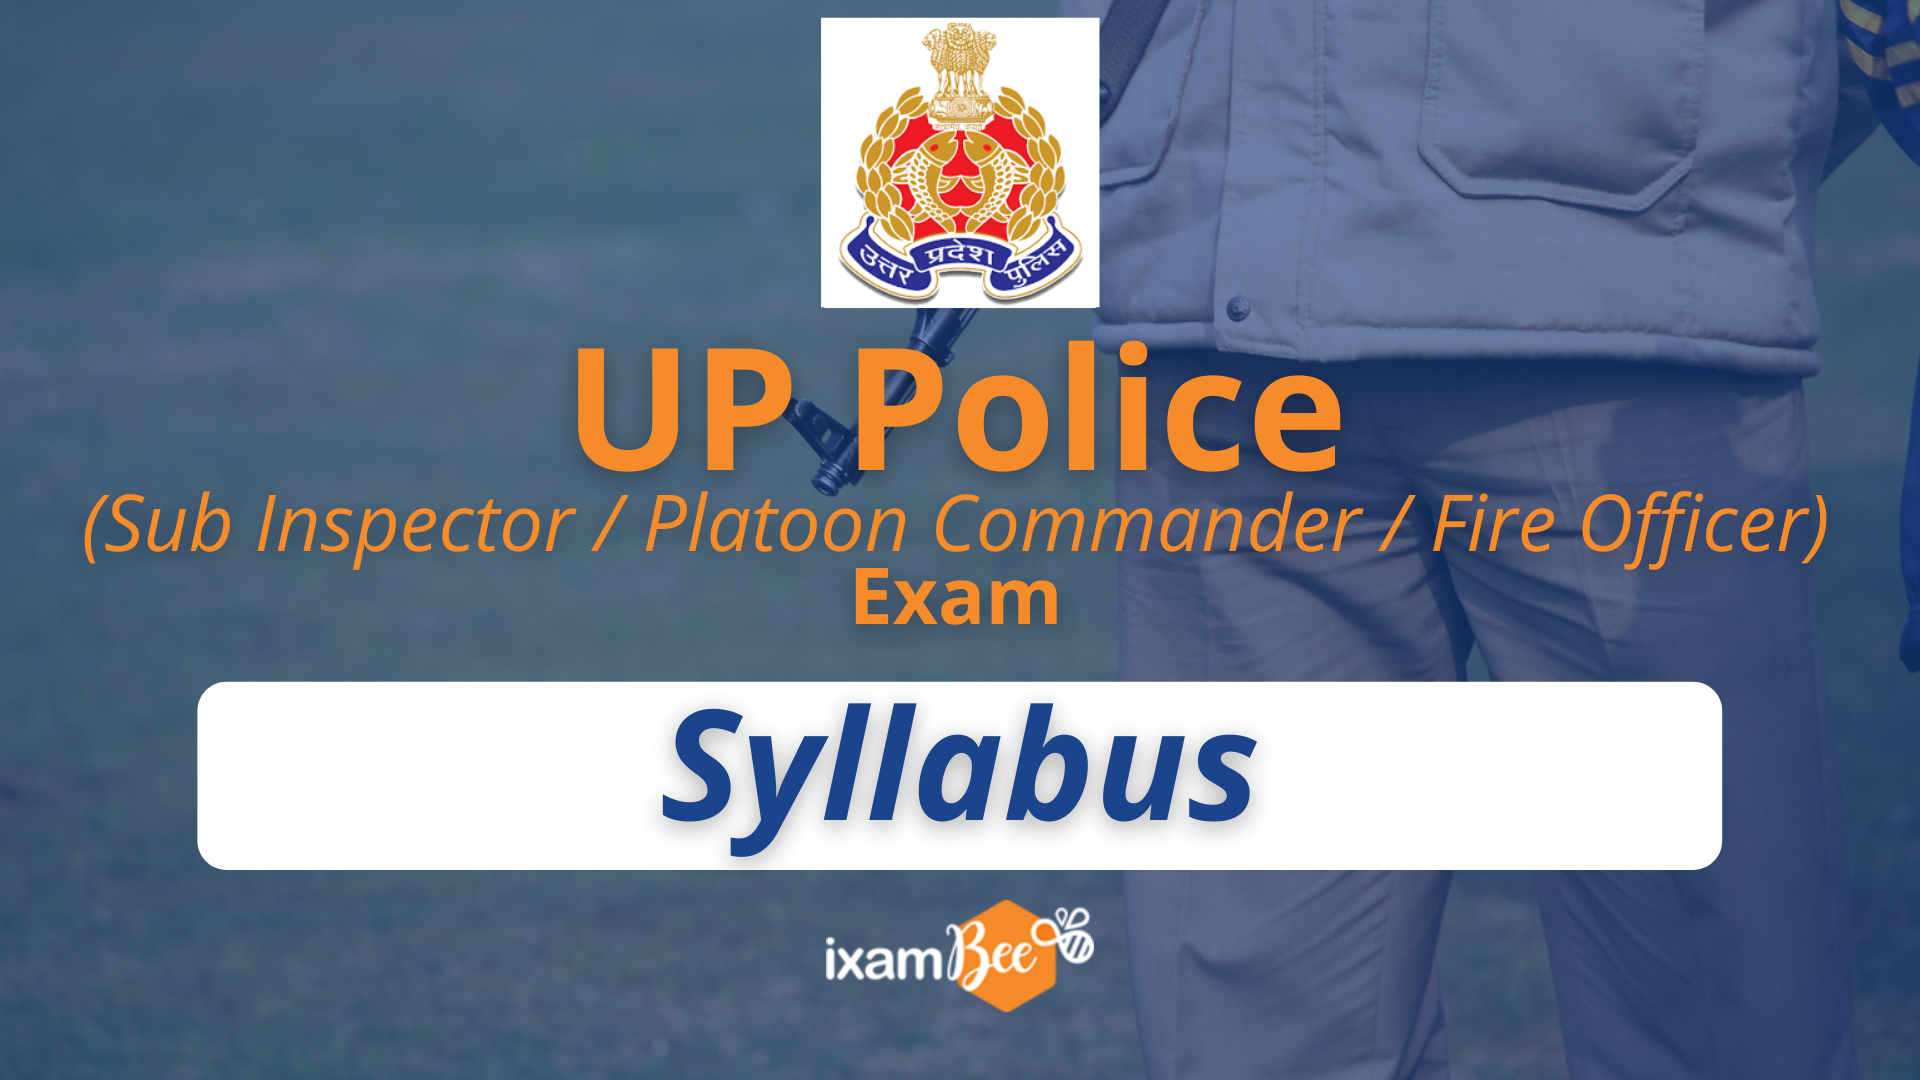 UP Police (Sub Inspector, Platoon Commander, and Fire Officer) Exam Syllabus